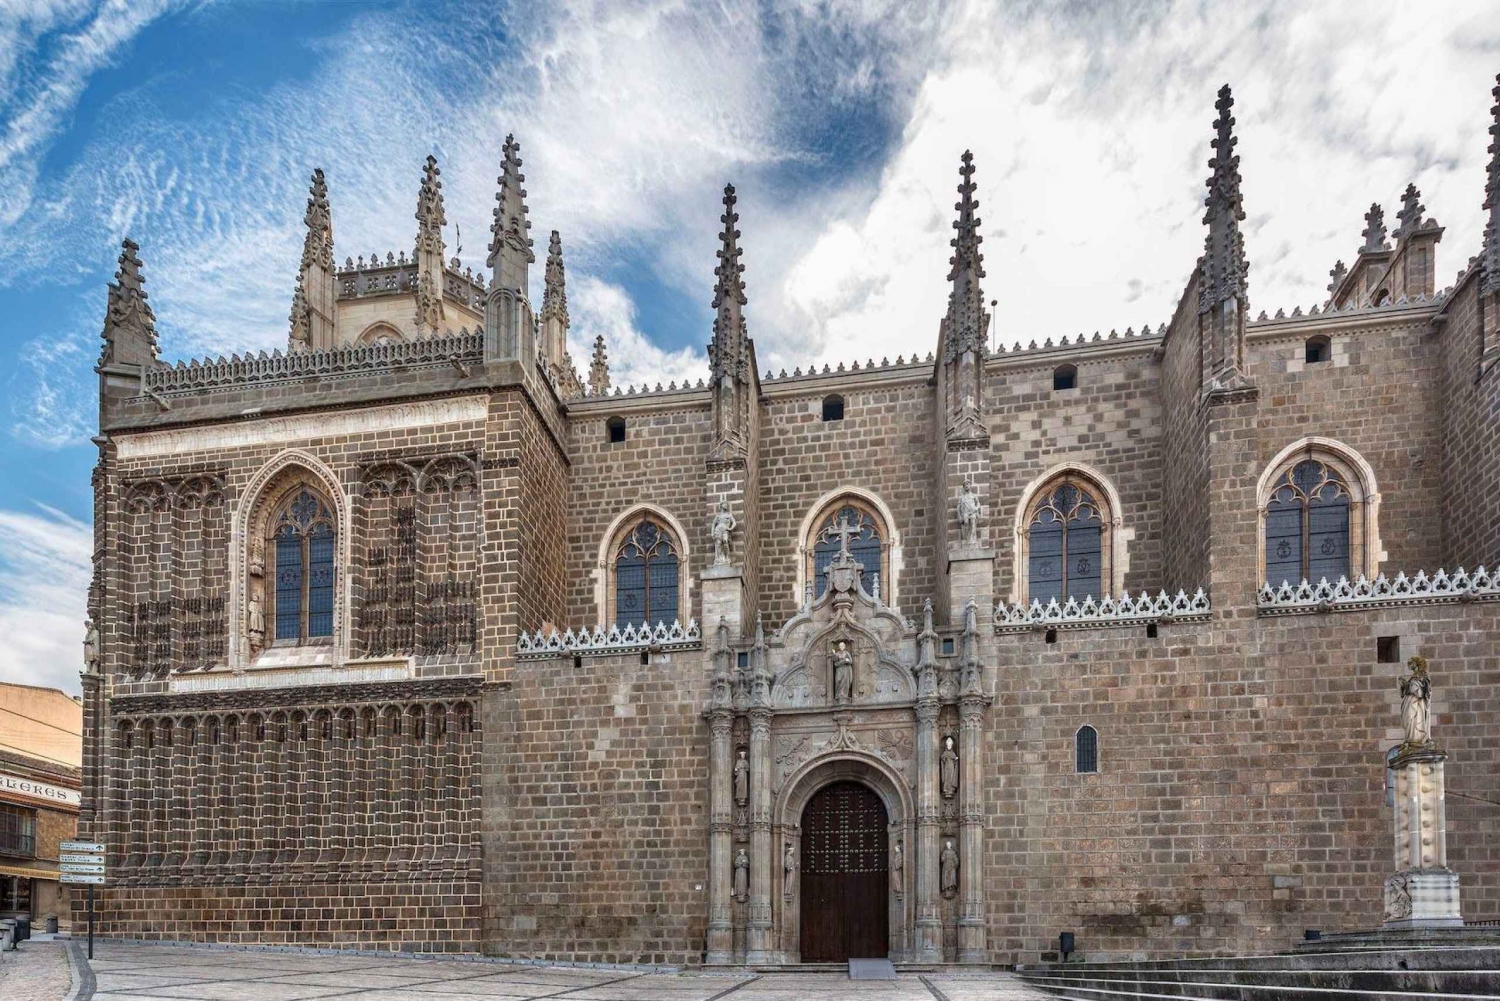 Full-Day Private Toledo Tour from Madrid With Driver & Guide